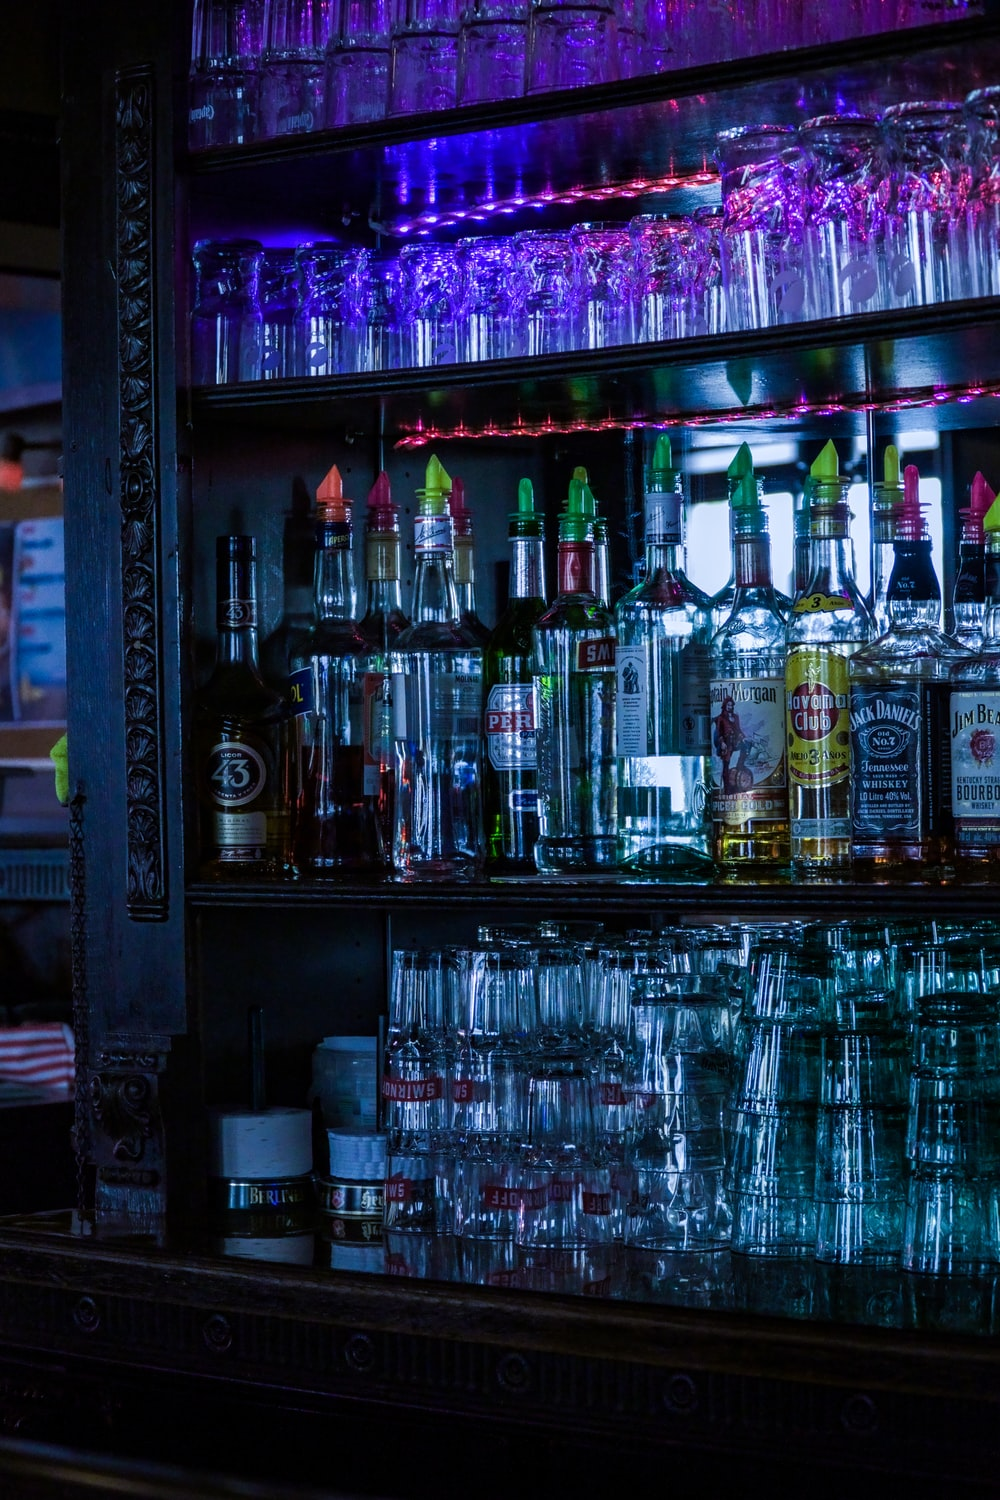 Pub crawls should be over for now, according to health officials